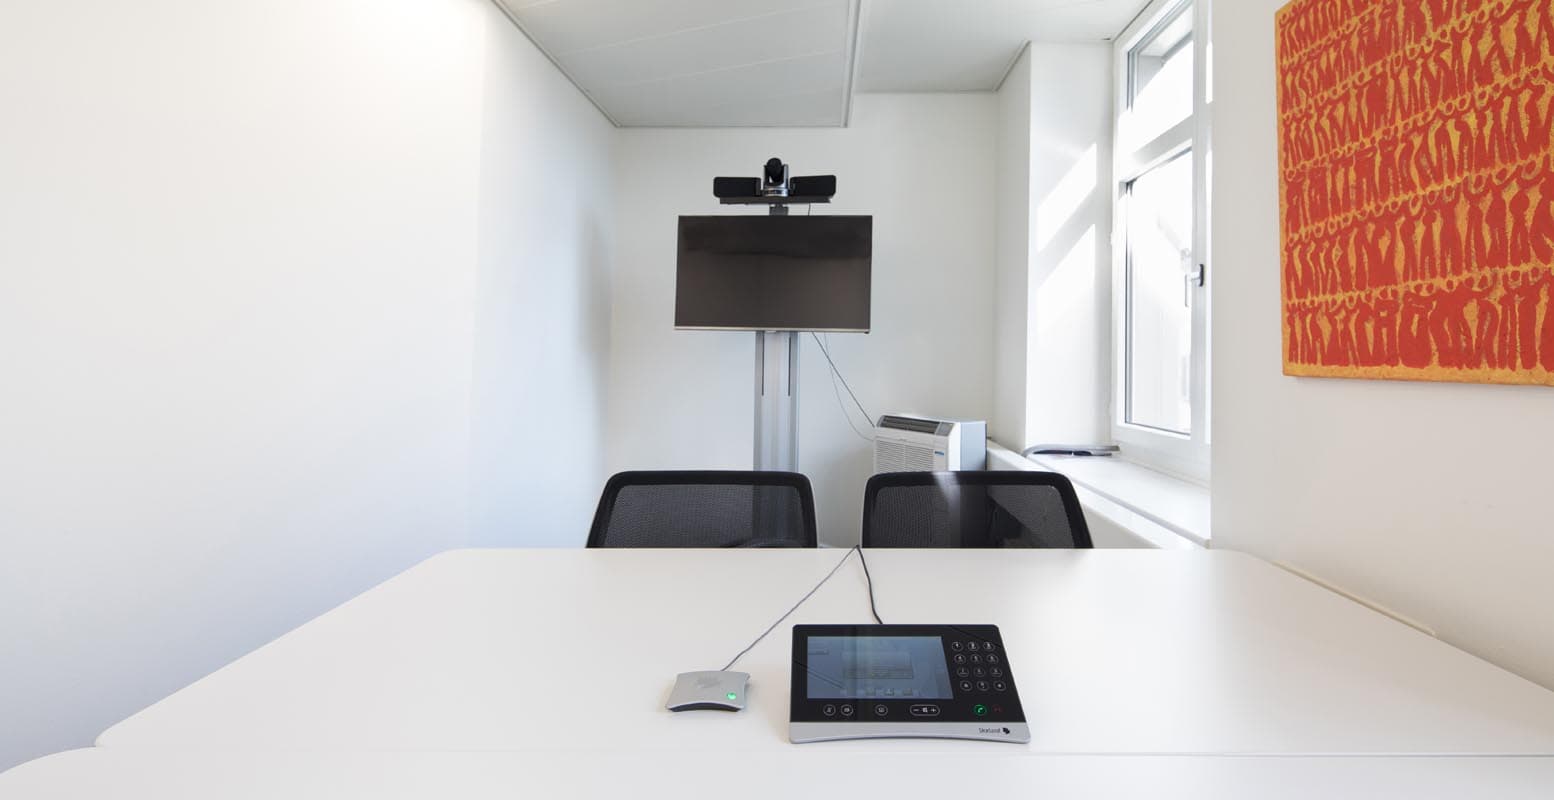 Meeting room for telephone conference with hands-free system